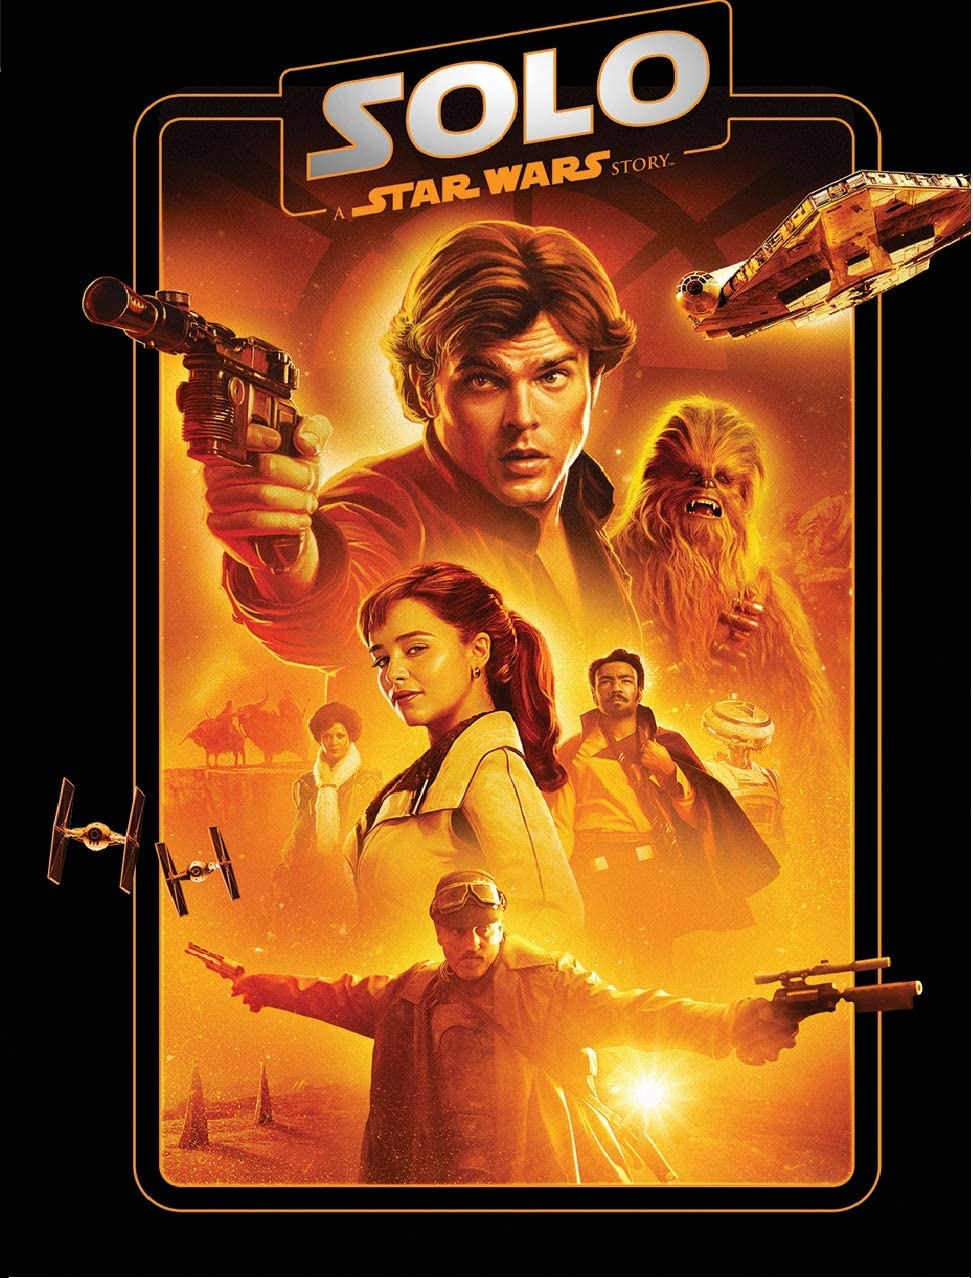 Solo: A Star Wars Story [2018] – Science-Fiction/Action [DVD]